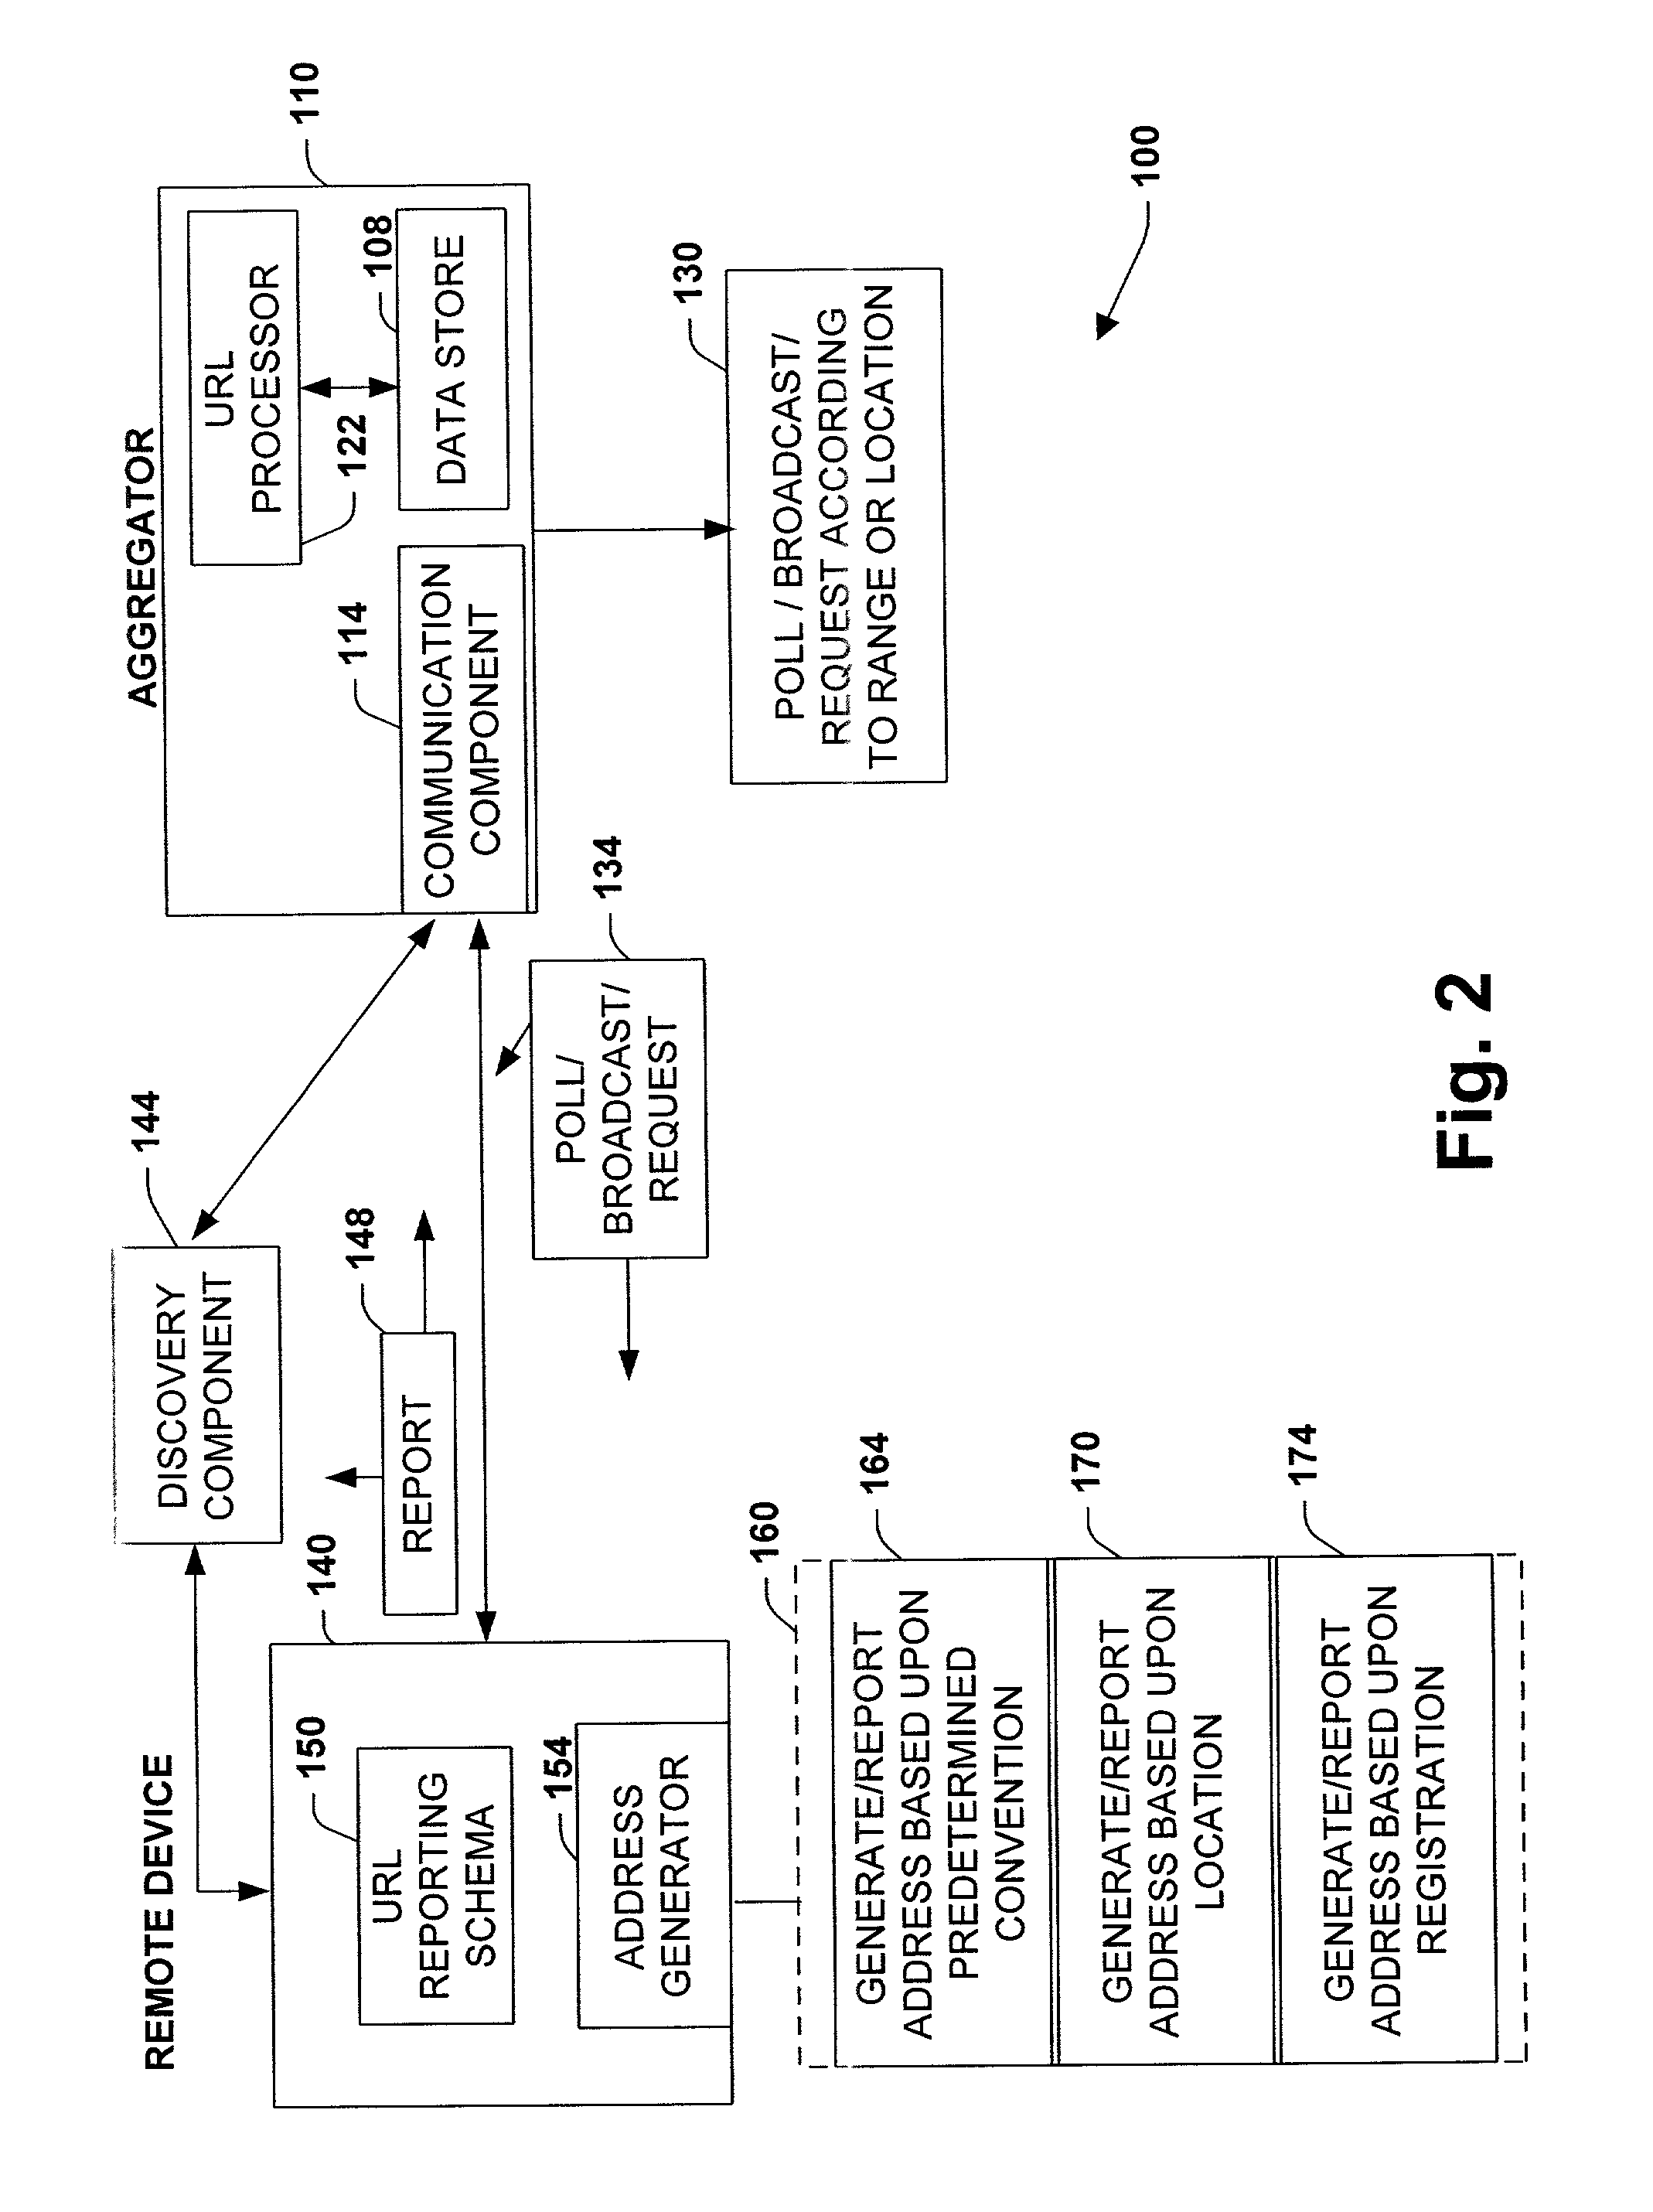 System and methodology providing namespace and protocol management in an industrial controller environment